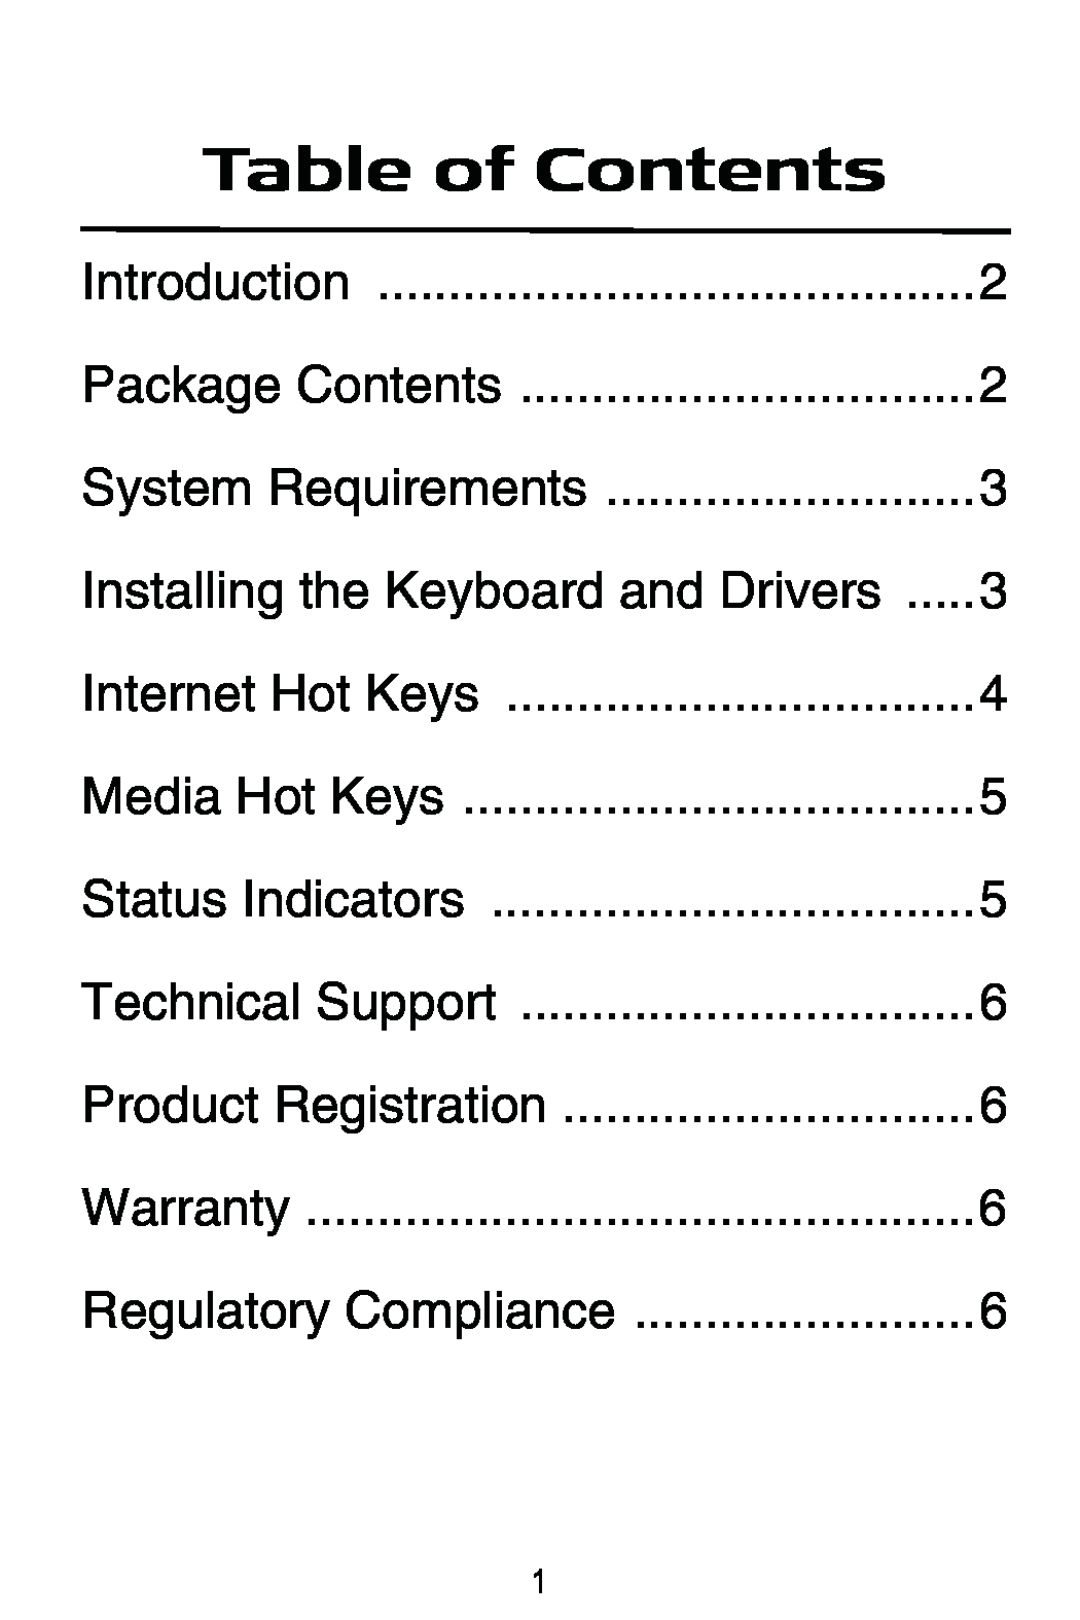 Targus internet multimedia USB keyboard specifications Table of Contents 